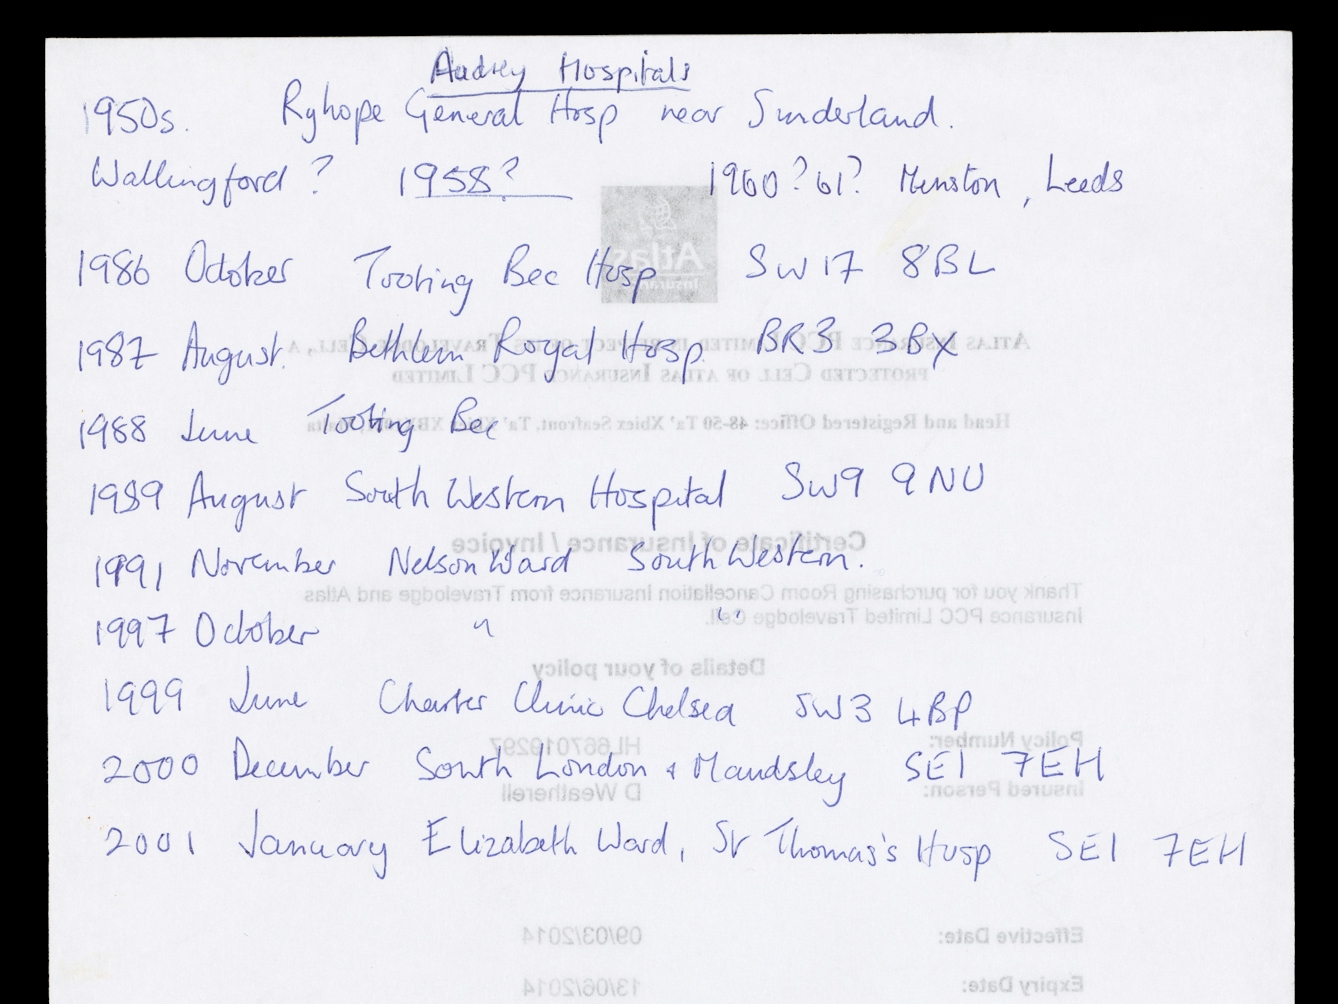 Photograph of the back of an official letter showing a handwritten list of hospitals and dates, along the lines of, "Audrey Hospitals. 1950s Ryhope General Hospital near Sunderland. 1986 October Tooting Bec Hospital SW17 8BL".